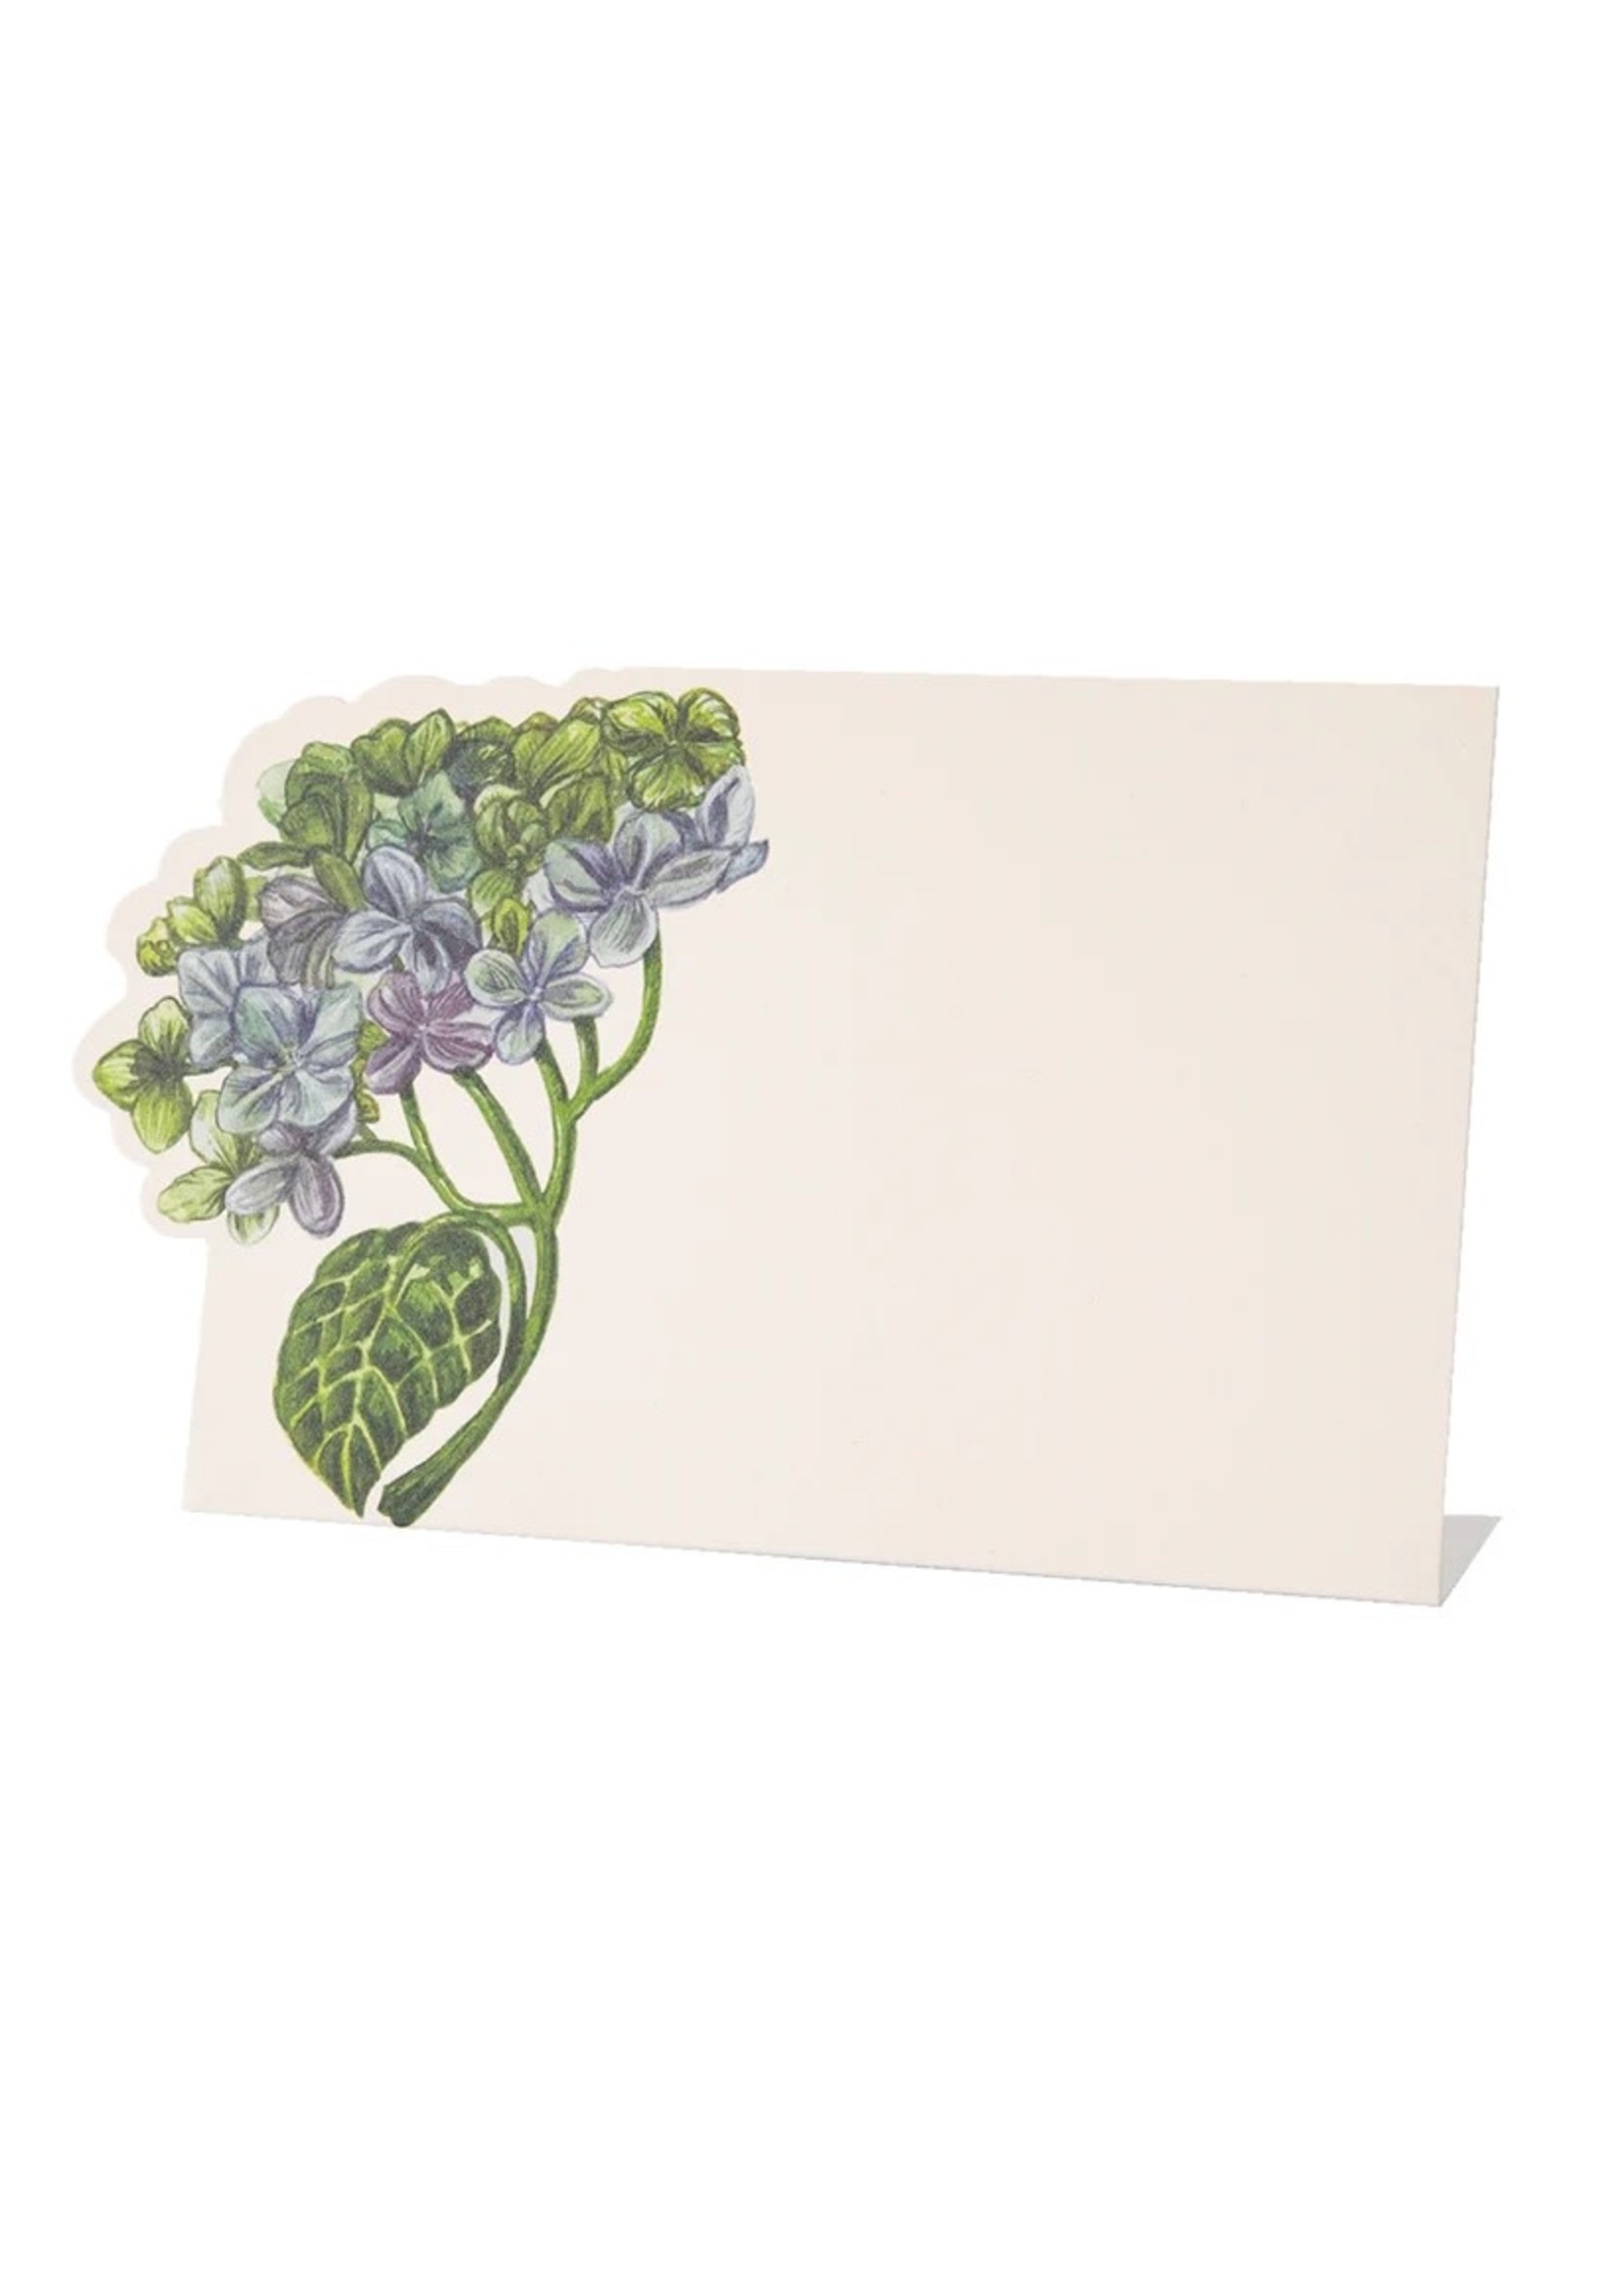 Hester & Cook Place Cards - Hydrangea (pack of 12)